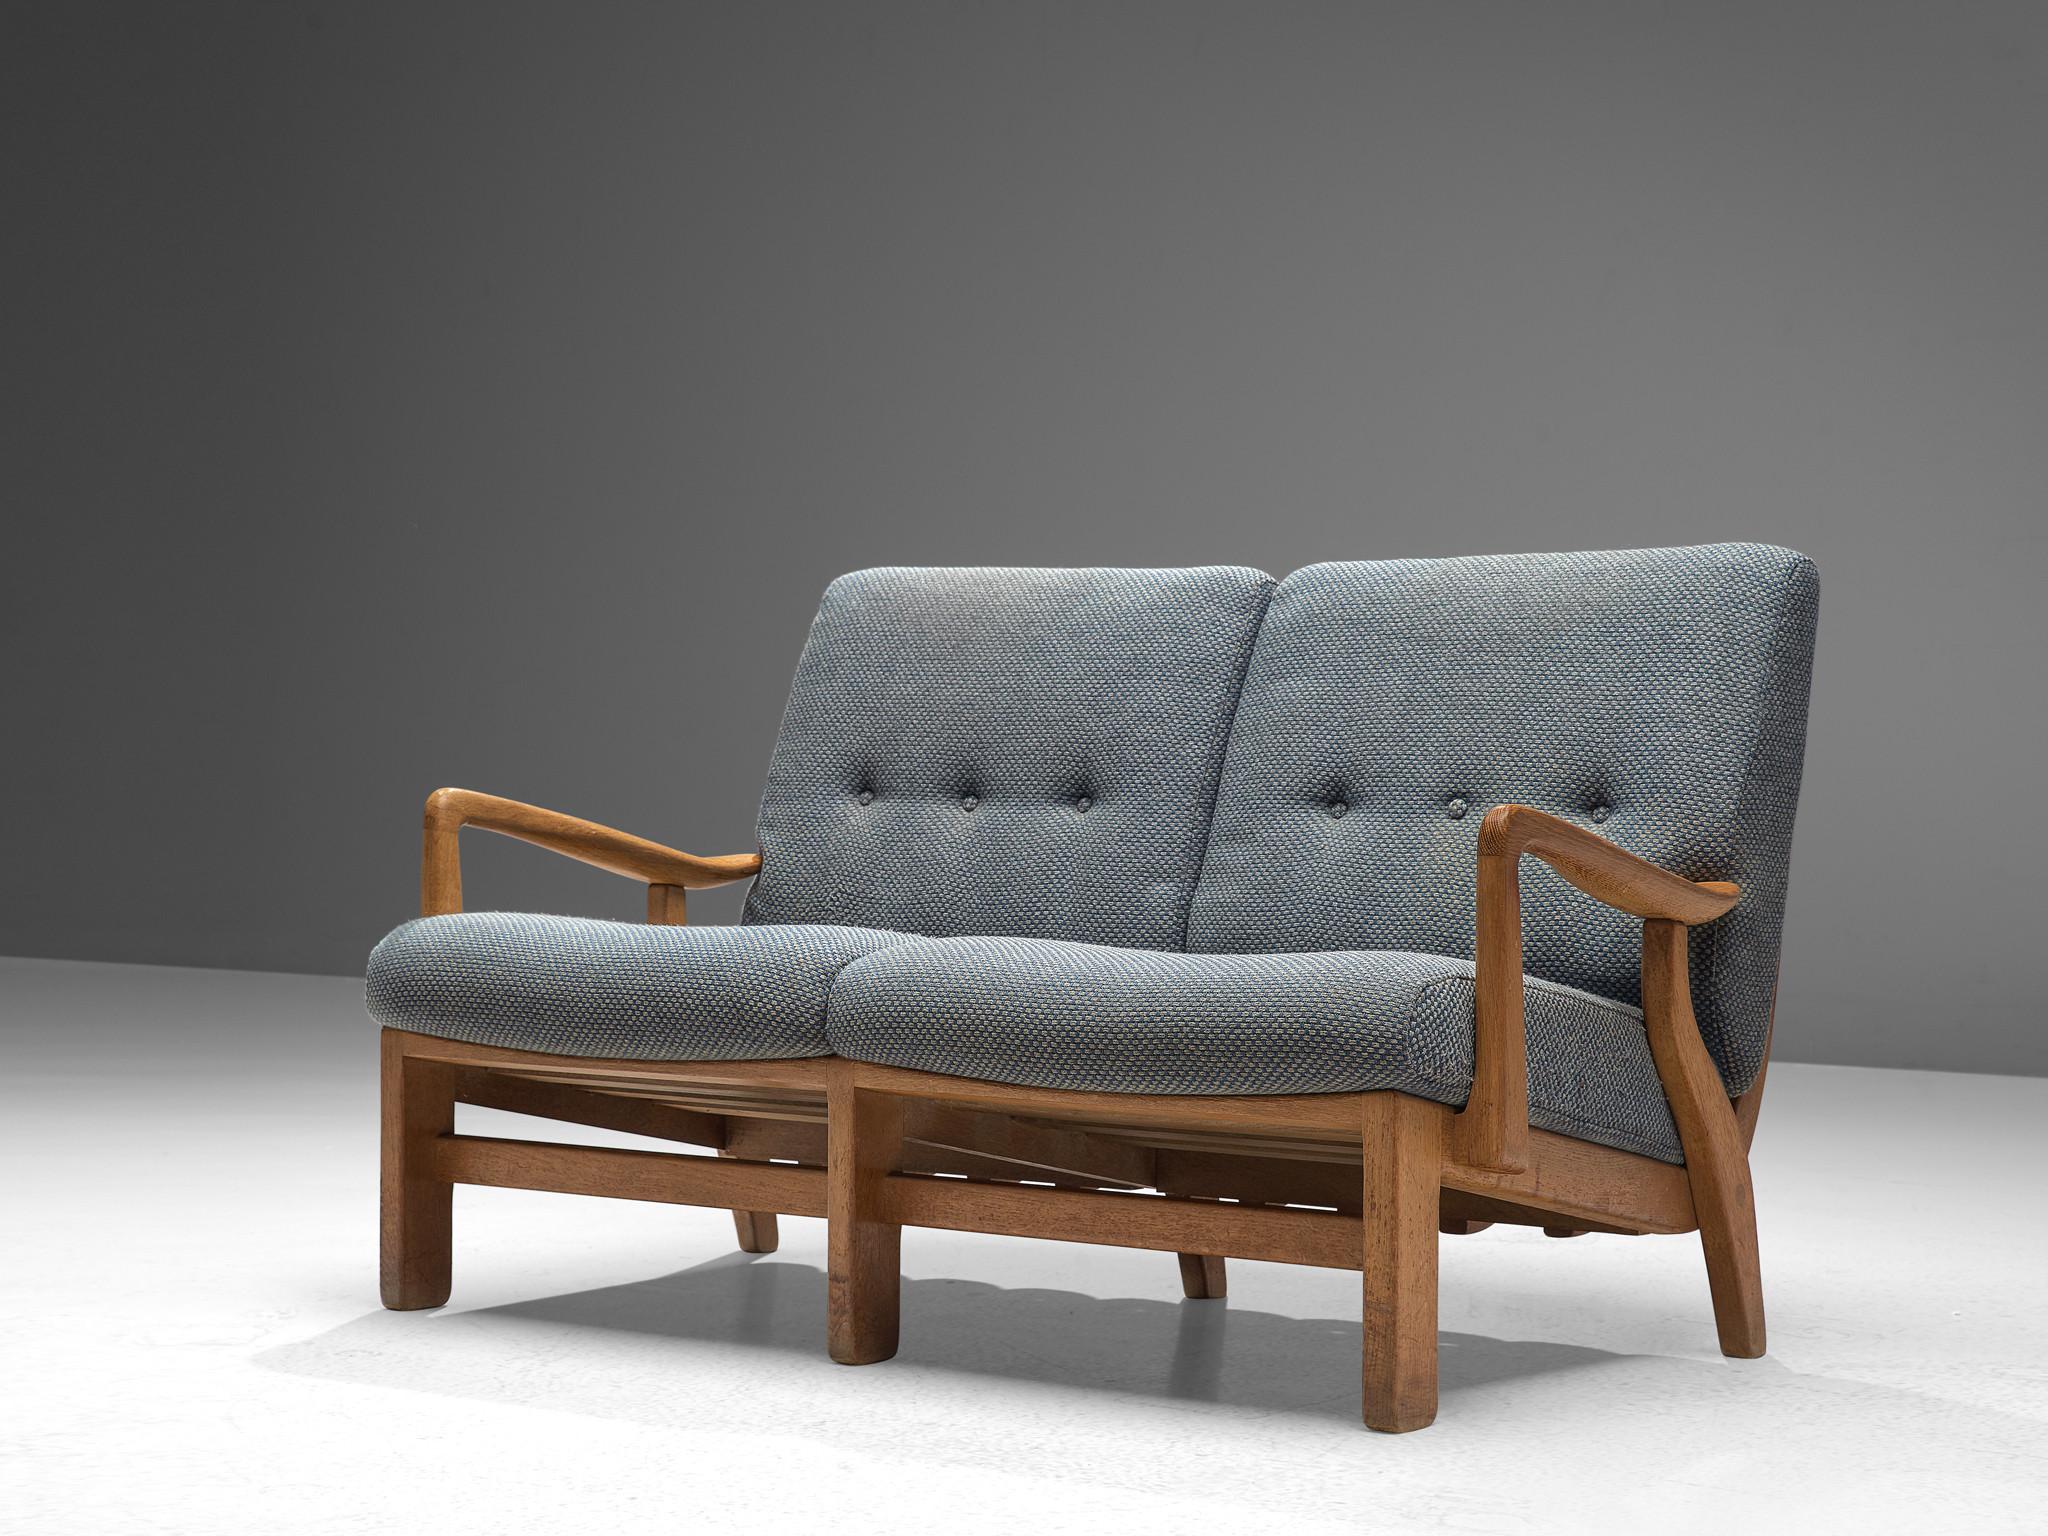 Guillerme & Chambron, sofa, oak, fabric, France, 1960s. 

Beautiful two-seat settee by Guillerme & Chambron, in solid oak. The back of the seat has been beautifully finished with wooden slats which adds an original and interesting character to the